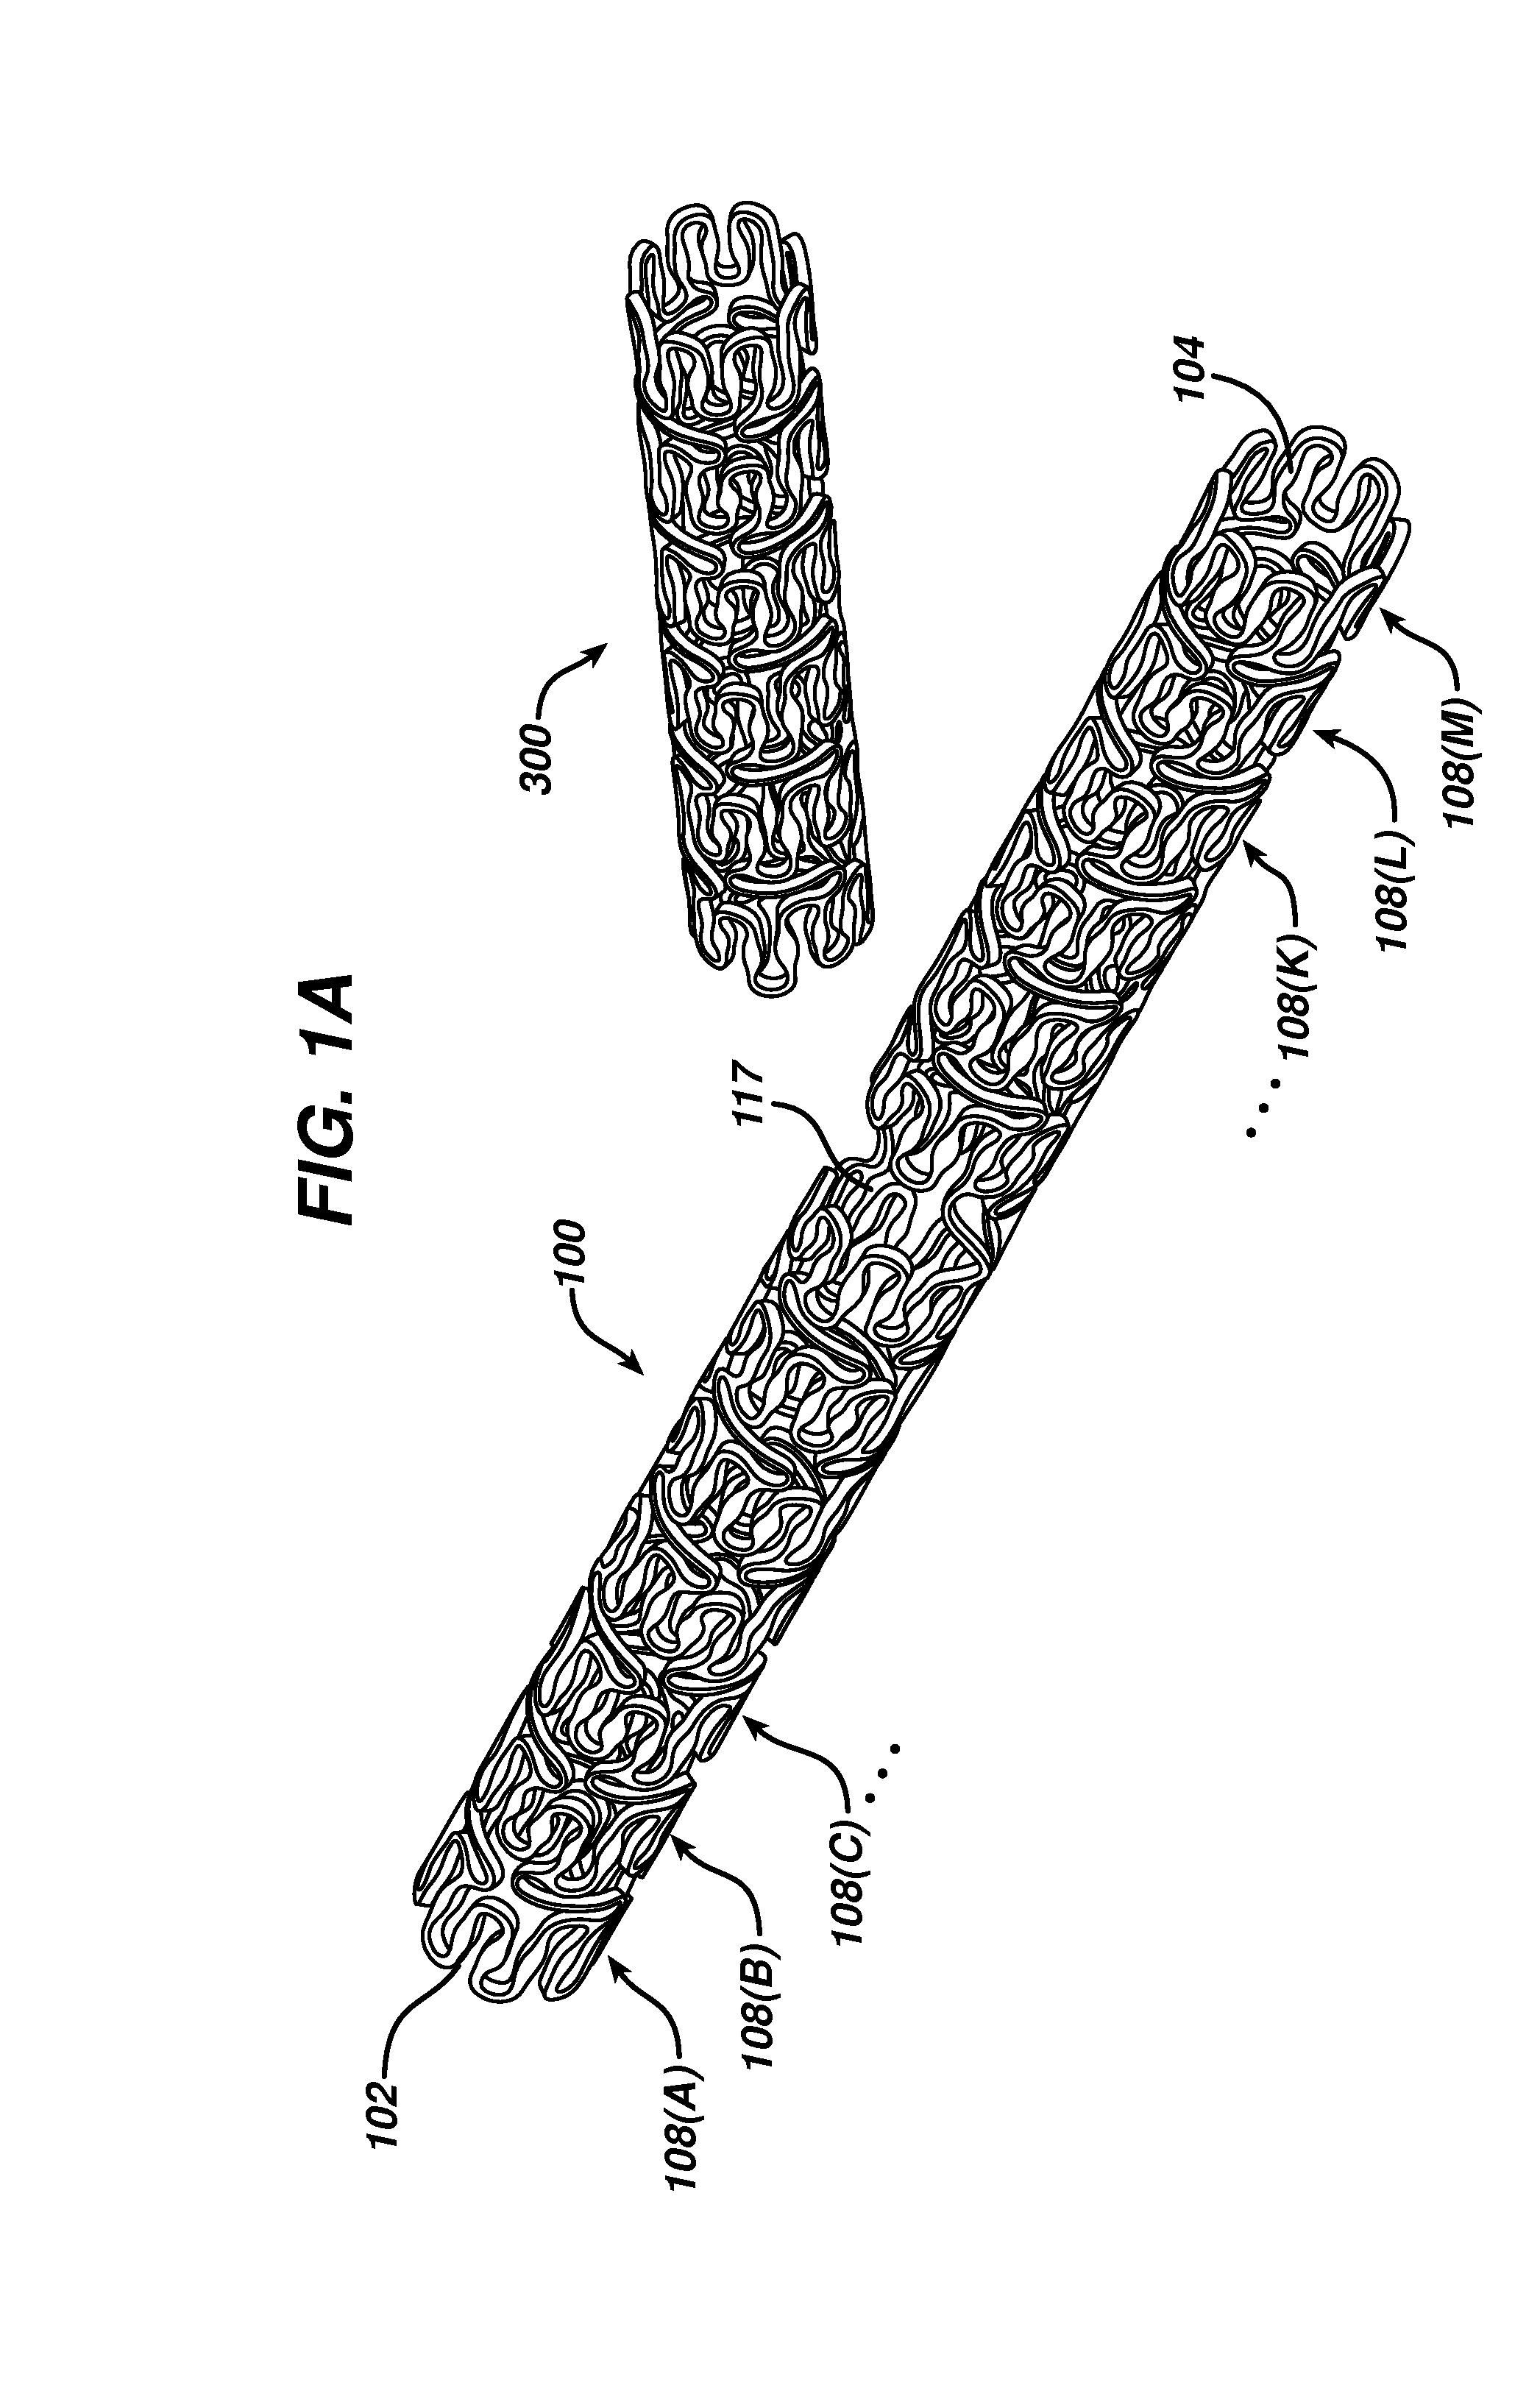 Method for placing a medical device at a bifurcated conduit